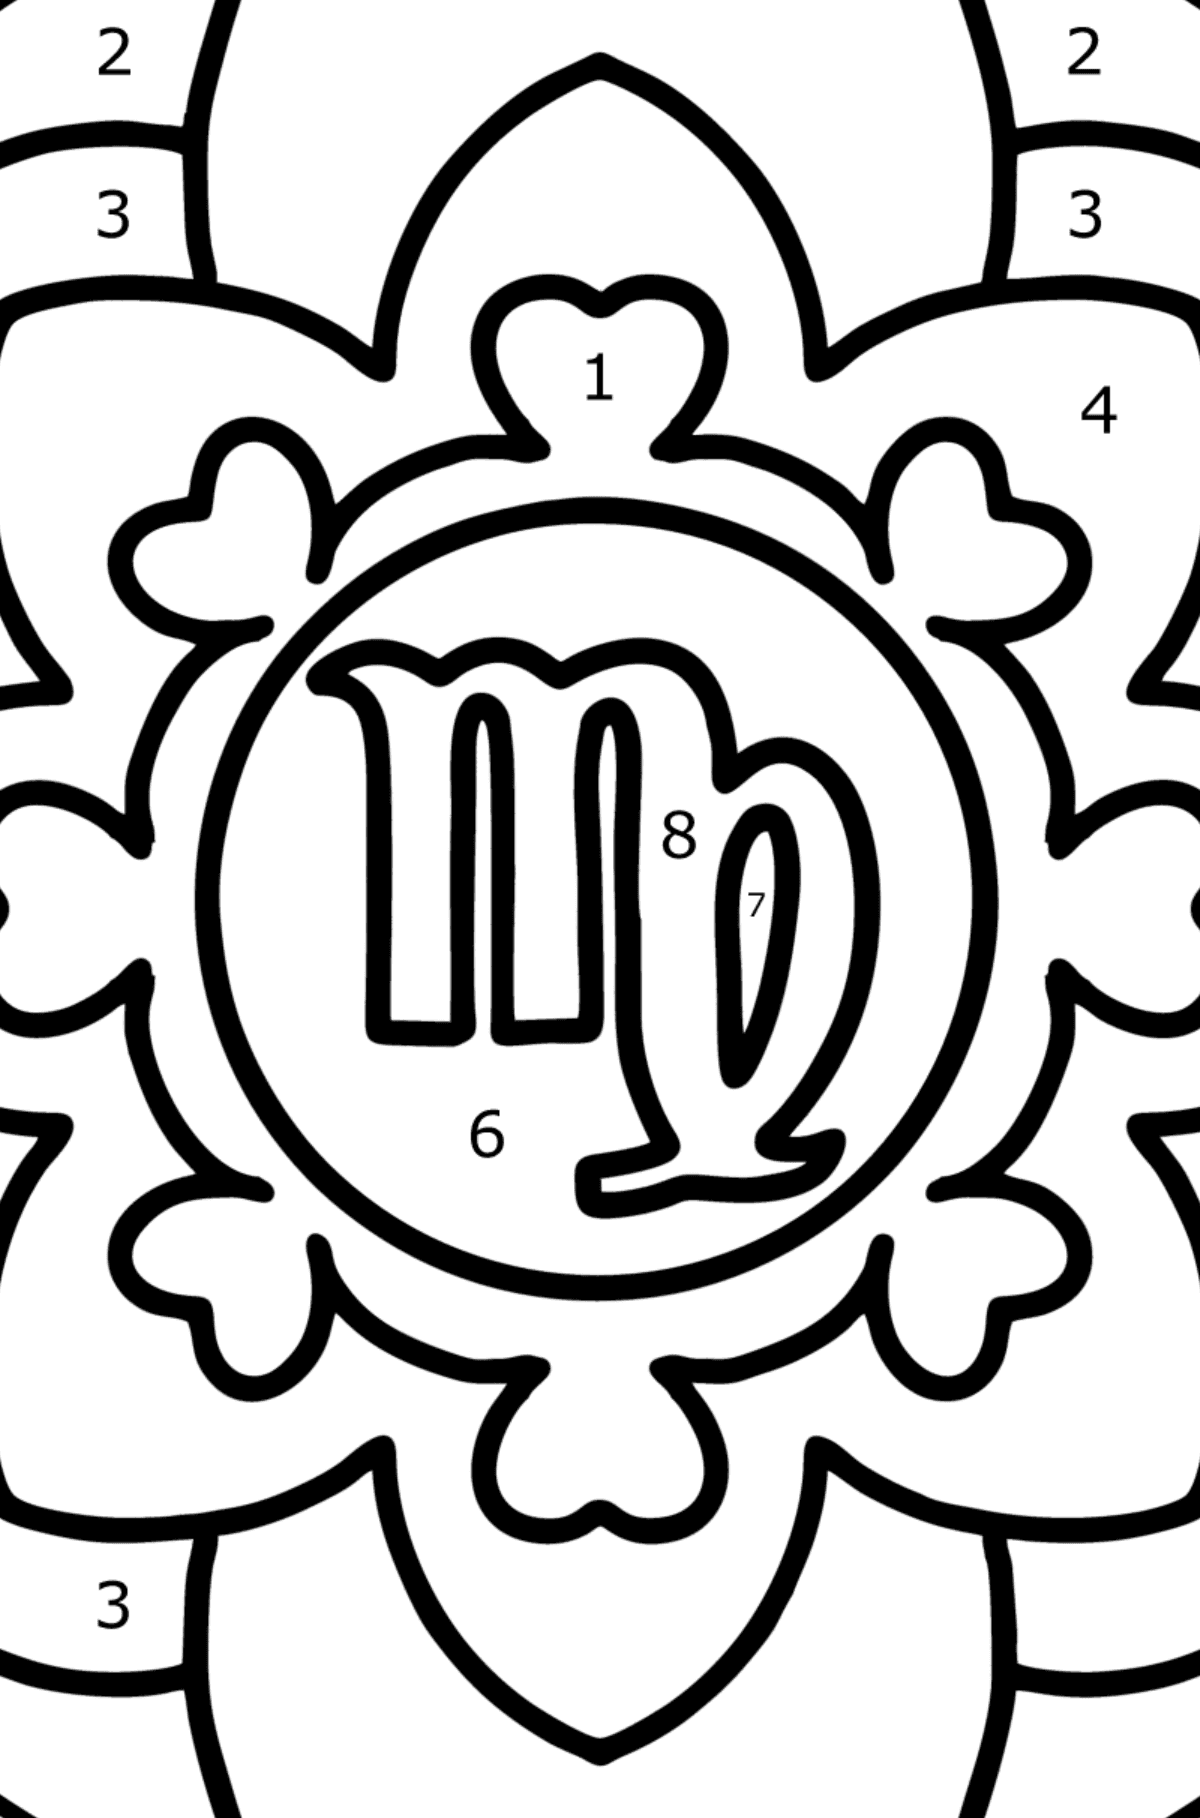 Coloring page - zodiac sign Virgo - Coloring by Numbers for Kids